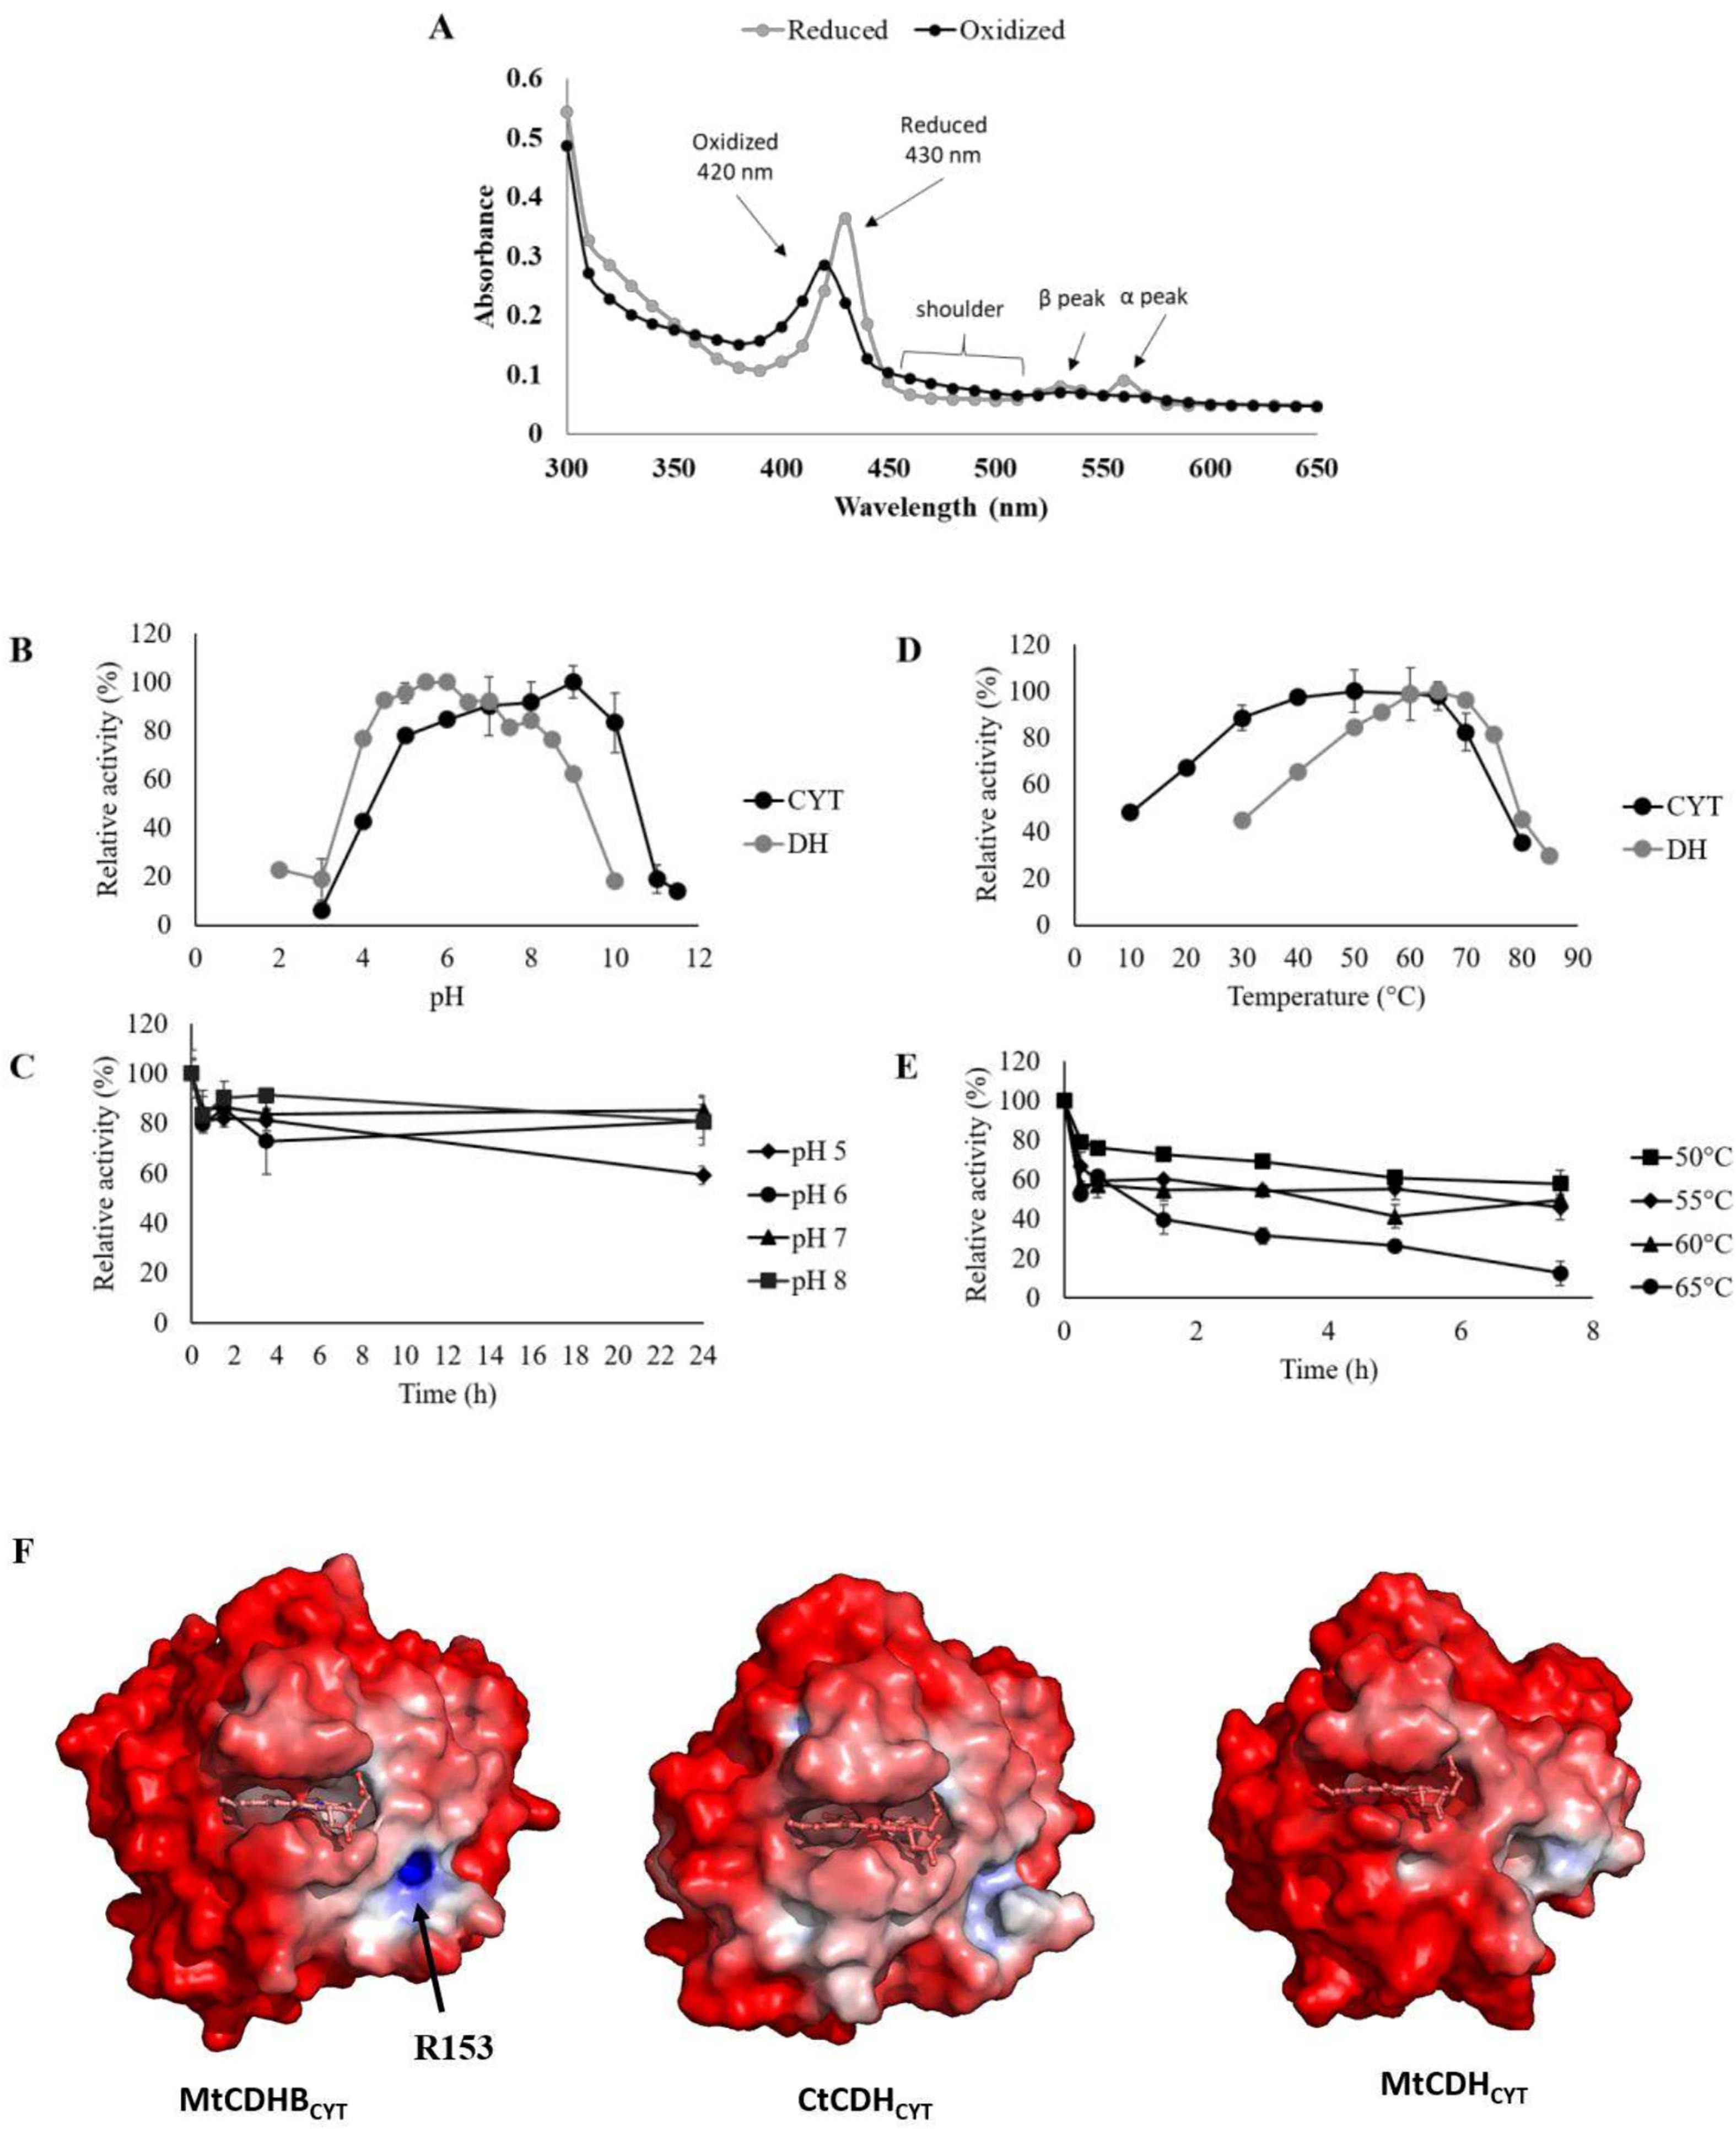 Recombinant cellobiose dehydrogenase from thermothelomyces thermophilus: its functional characterization and applicability in cellobionic acid production.